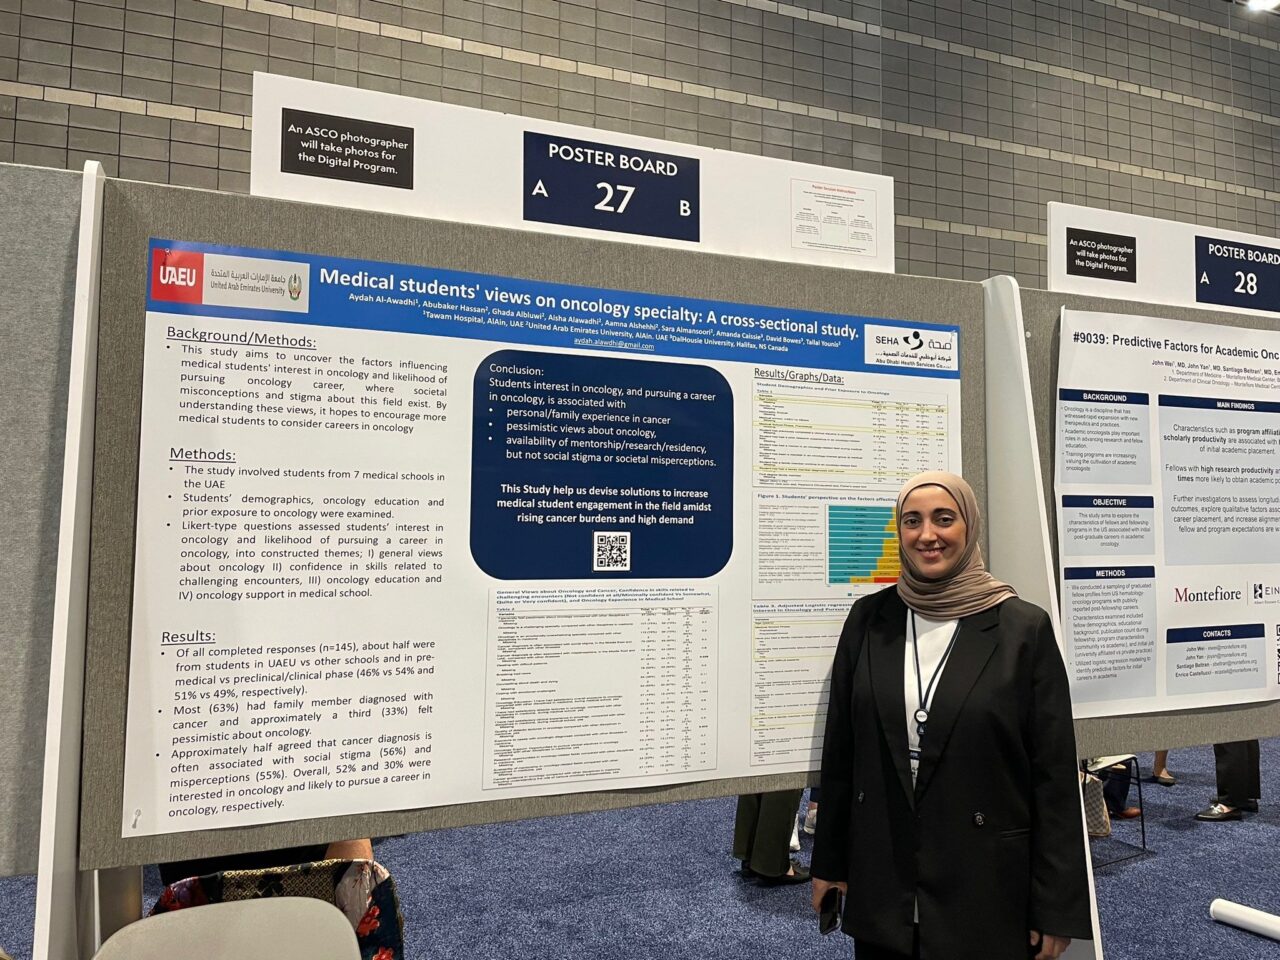 Aydah AlAwadhi: We presented our abstract at the prestigious ASCO24